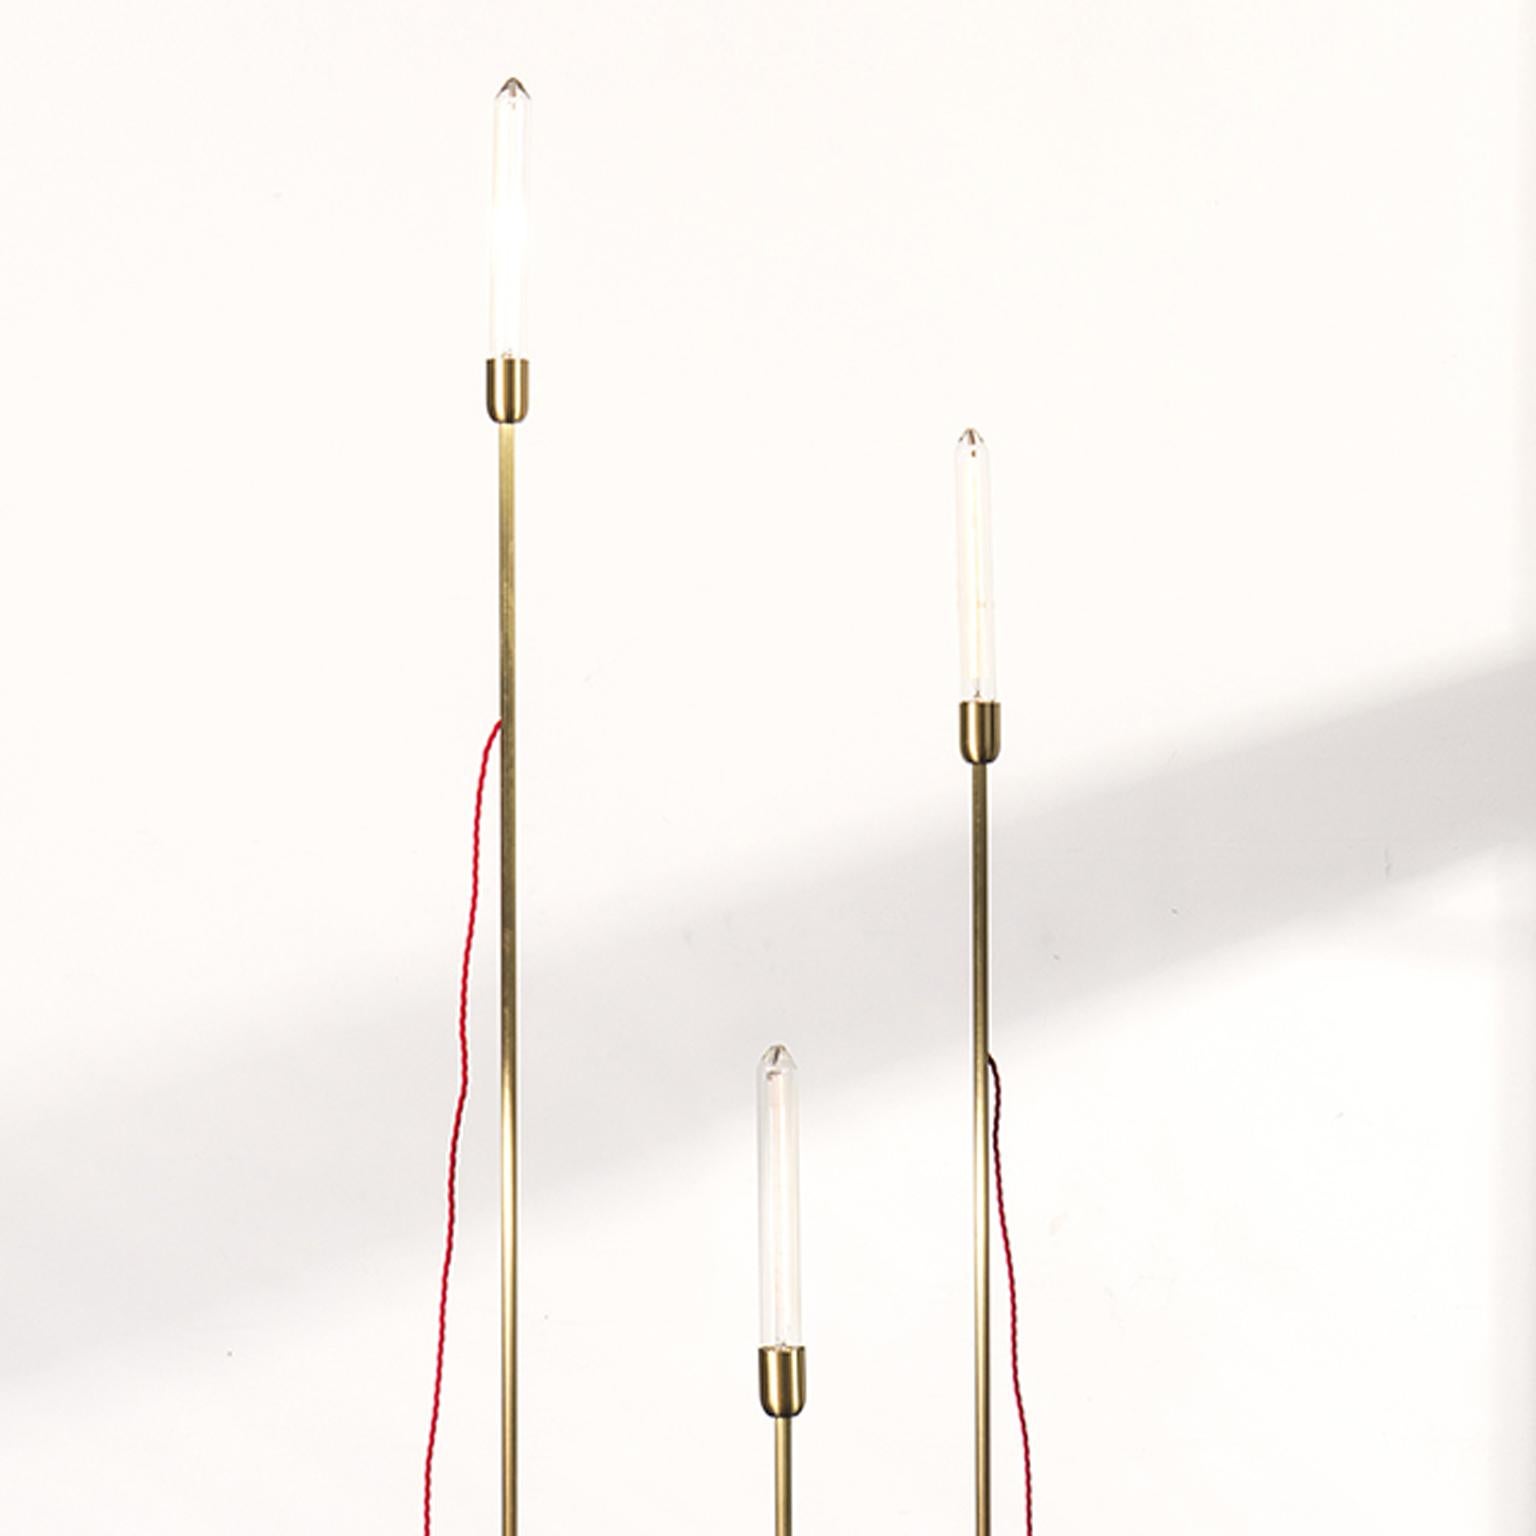 This installation is composed by a group of standing lights. The stems in opaque brass of each light have different heights, and the handmade base is in rough iron. The light bulbs are in retro stile incandescence or led. Colored fabric wires are a